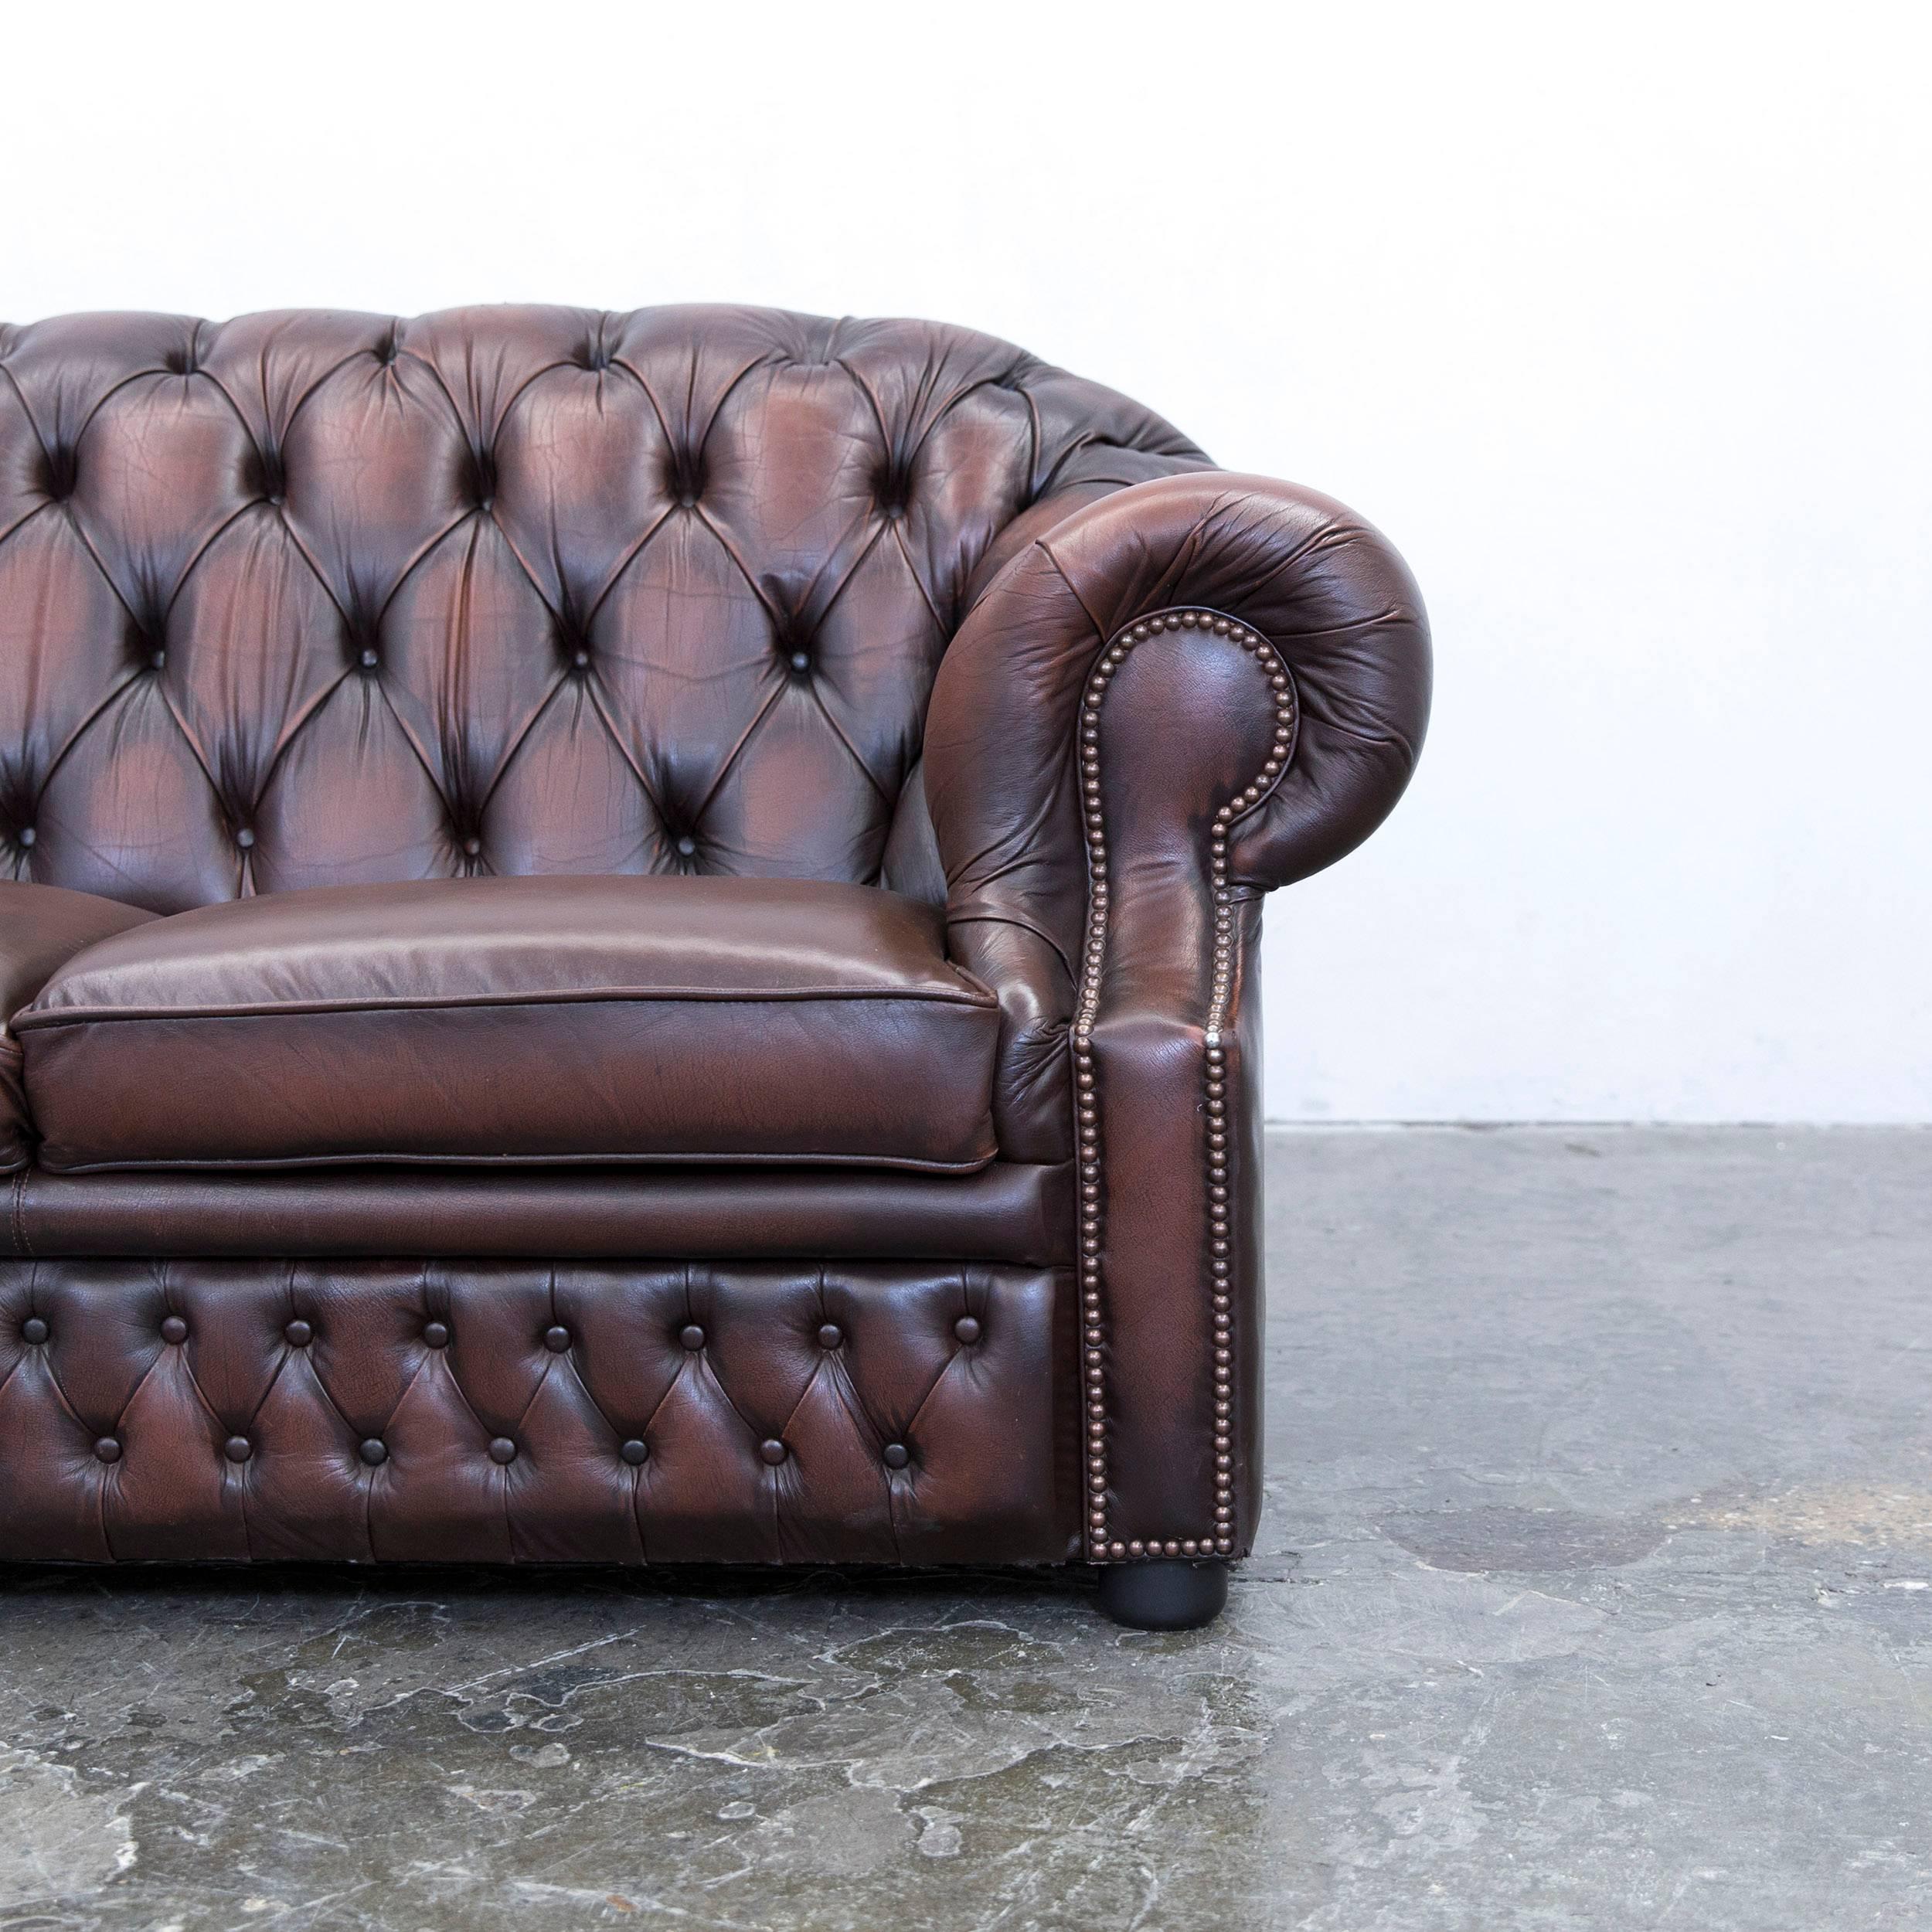 British Chesterfield Centurion Leather Sofa Brown Red Two-Seat Vintage Retro